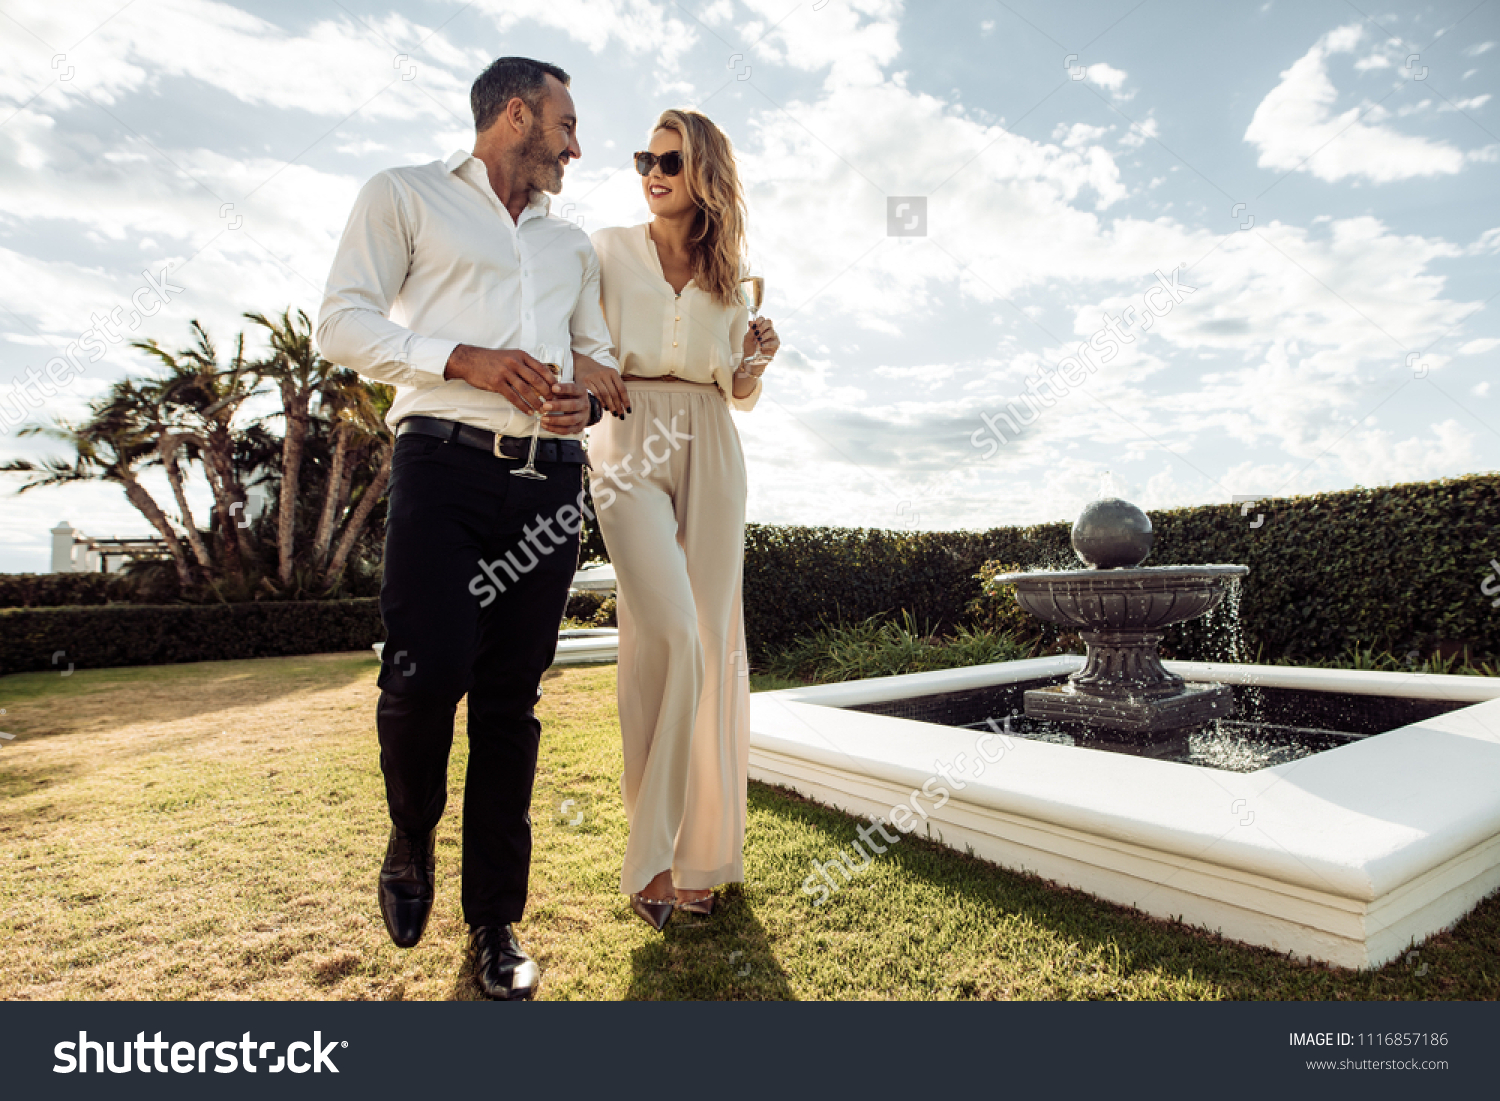 Stylish couple walking outdoors in lawn with a glass of wine. Man and woman looking at each other and walking together outdoors.. #1116857186